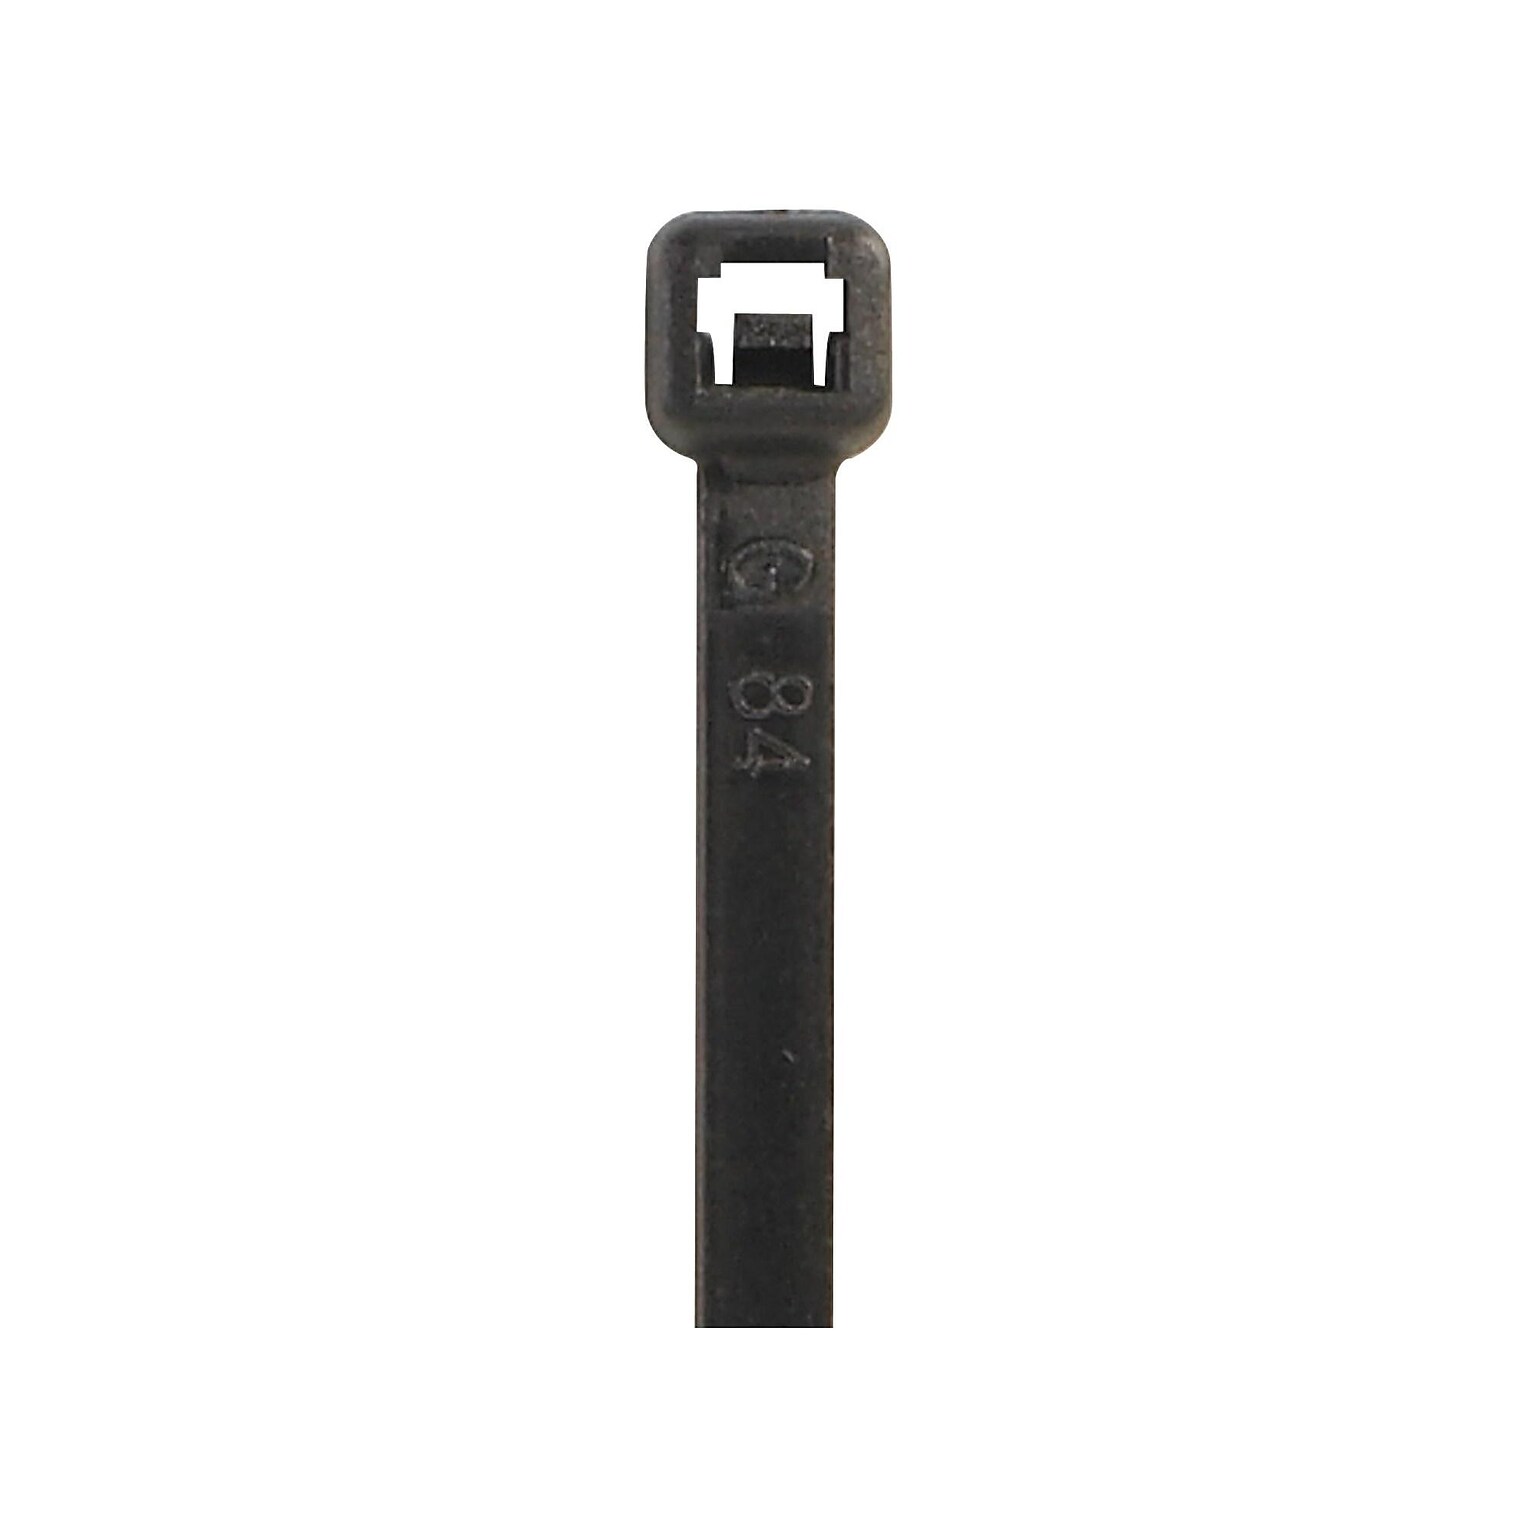 Box Partners Cable Ties, Black, 100/Case (CTUV8120)